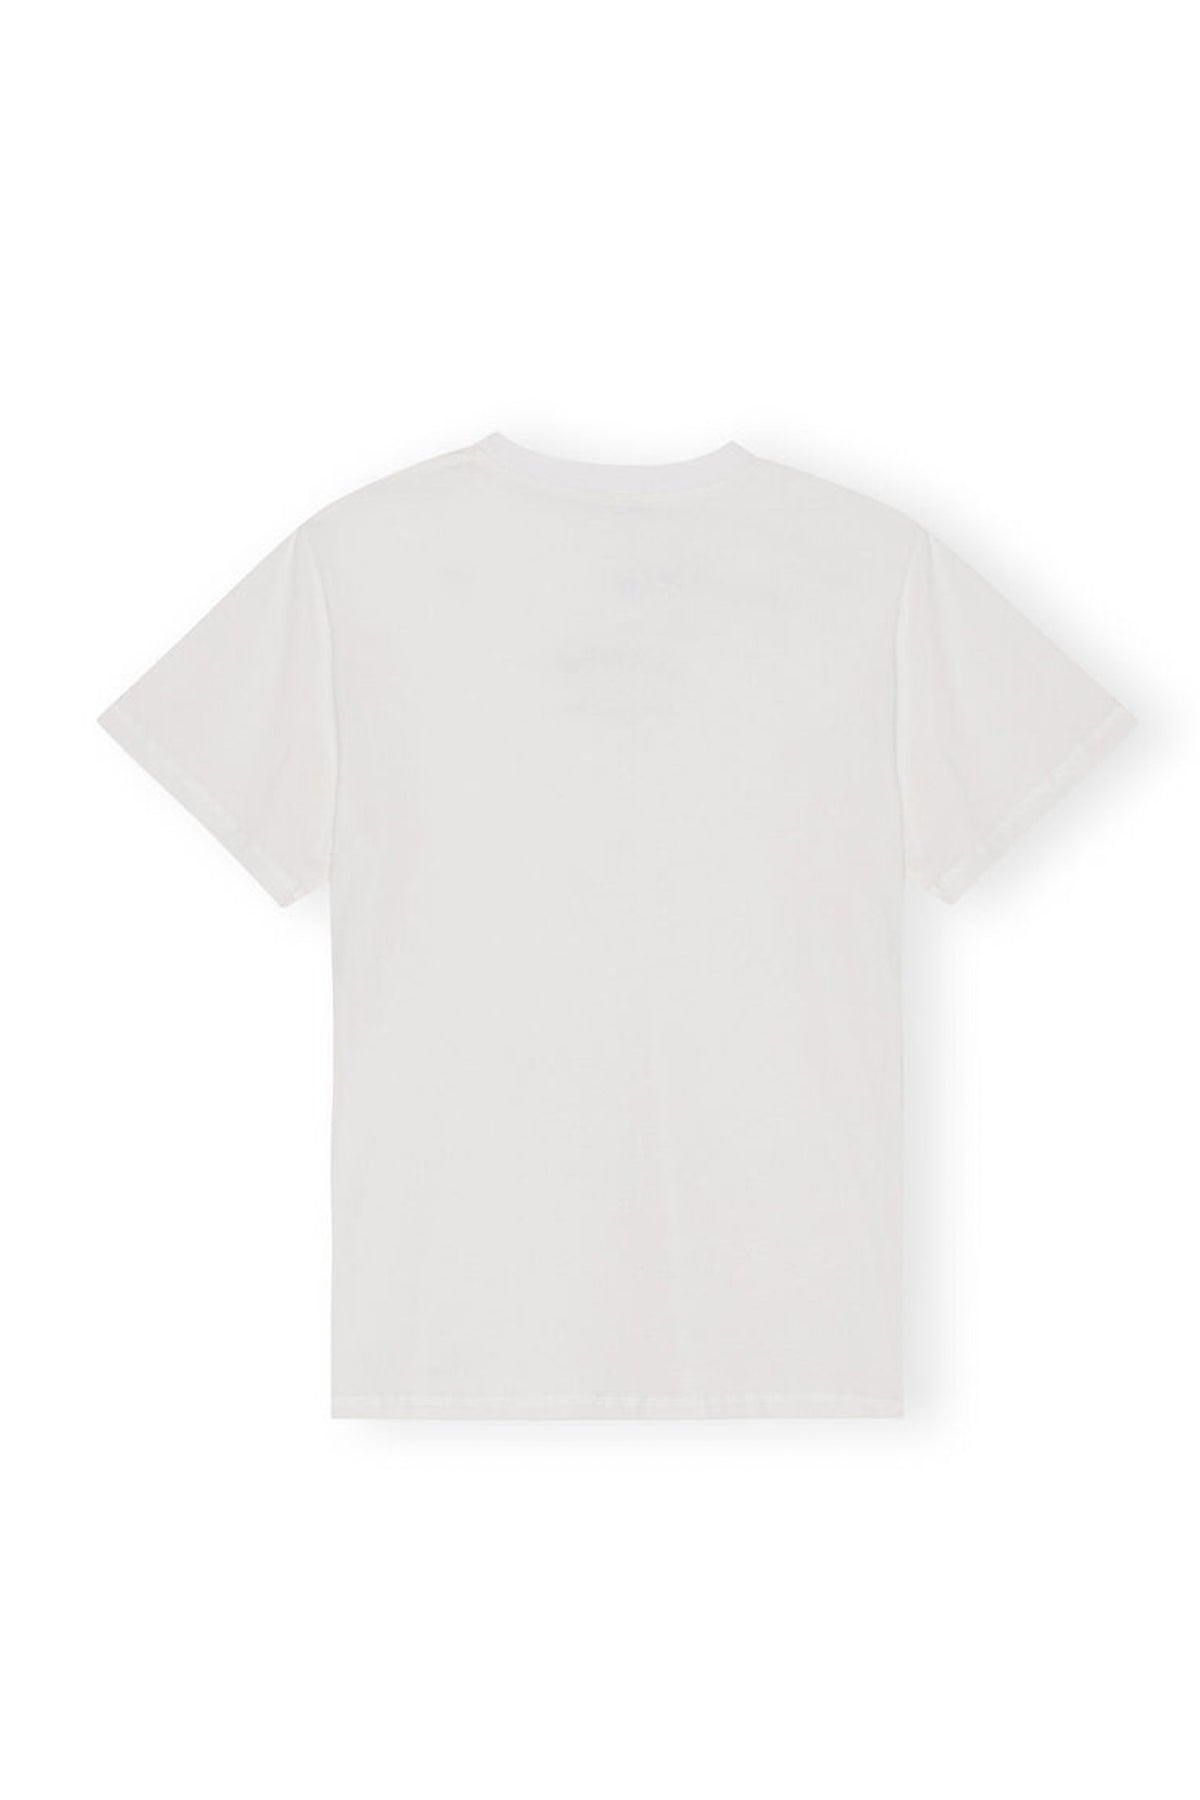 RELAXED O-NECK T-SHIRT / WHT